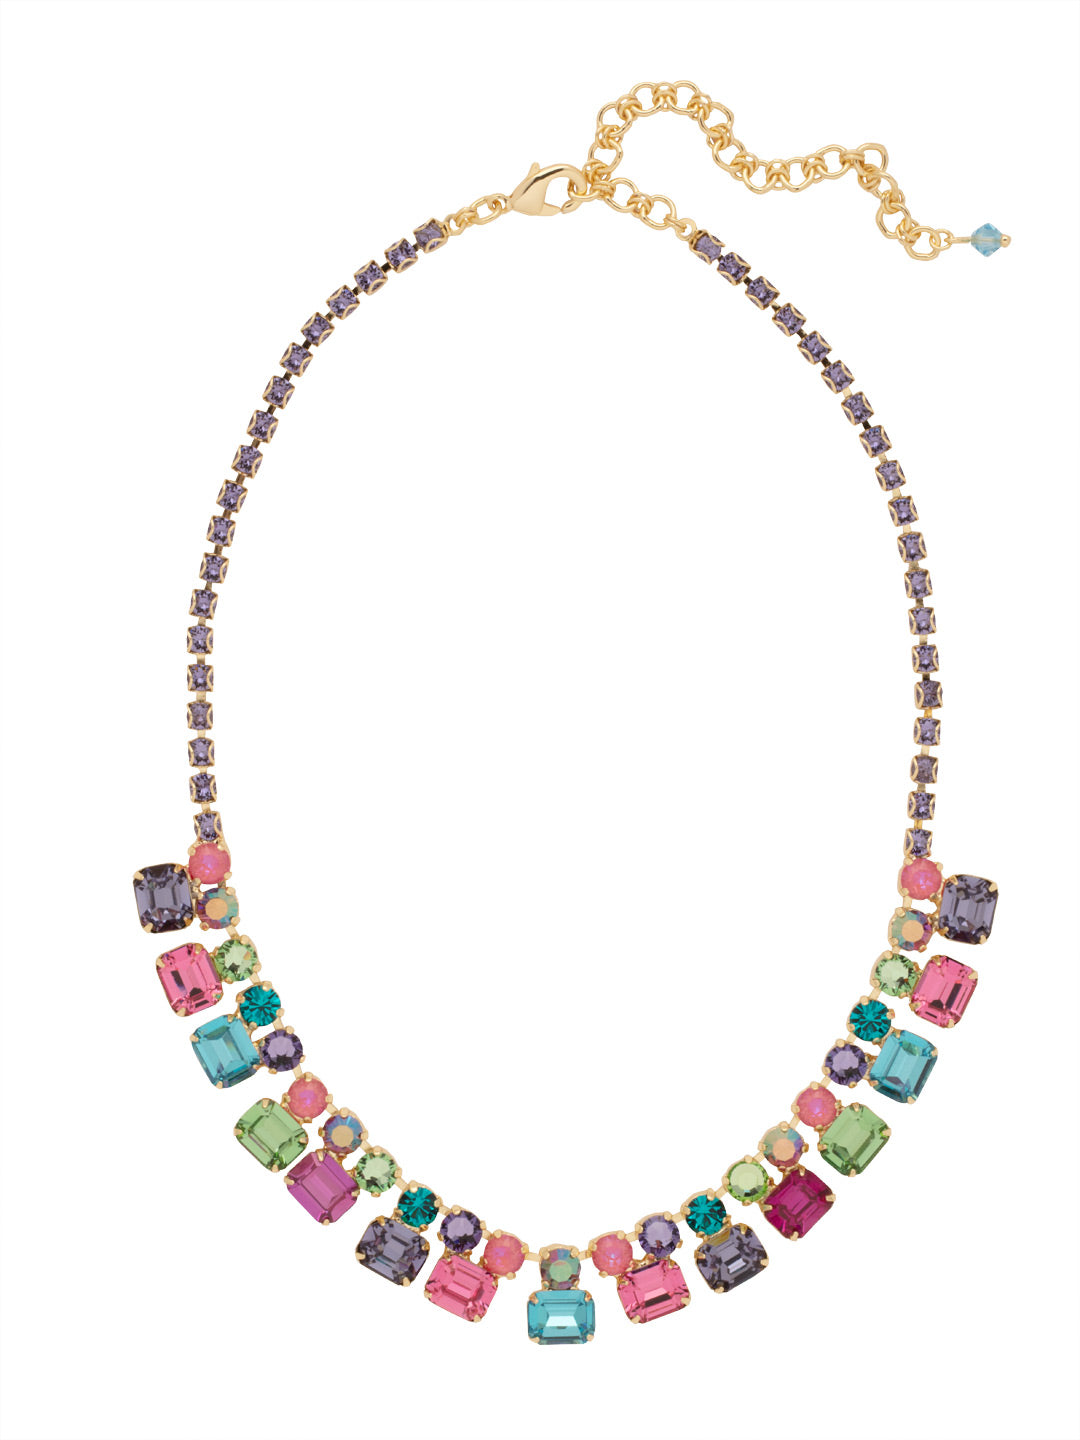 Bessie Tennis Necklace - NFF42BGHBR - <p>The Bessie Tennis Necklace features a sparkling assortment of round and octagon cut crystals on an adjustable crystal embellished chain, secured by a lobster claw clasp. From Sorrelli's Happy Birthday Redux collection in our Bright Gold-tone finish.</p>